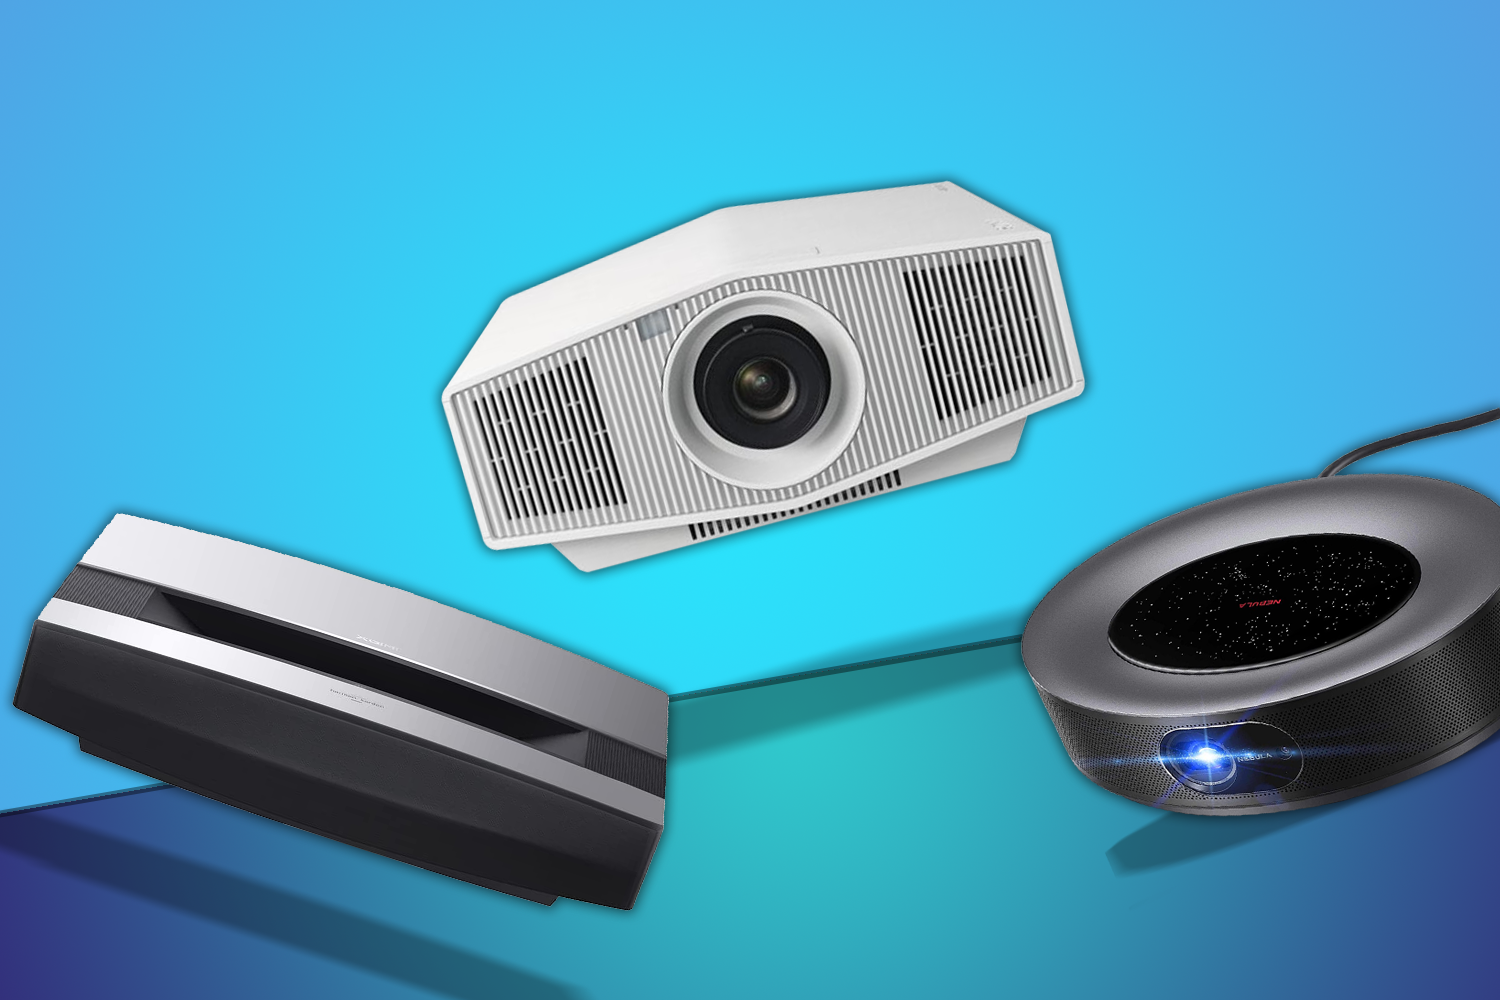 The Best Home Projectors for 2024